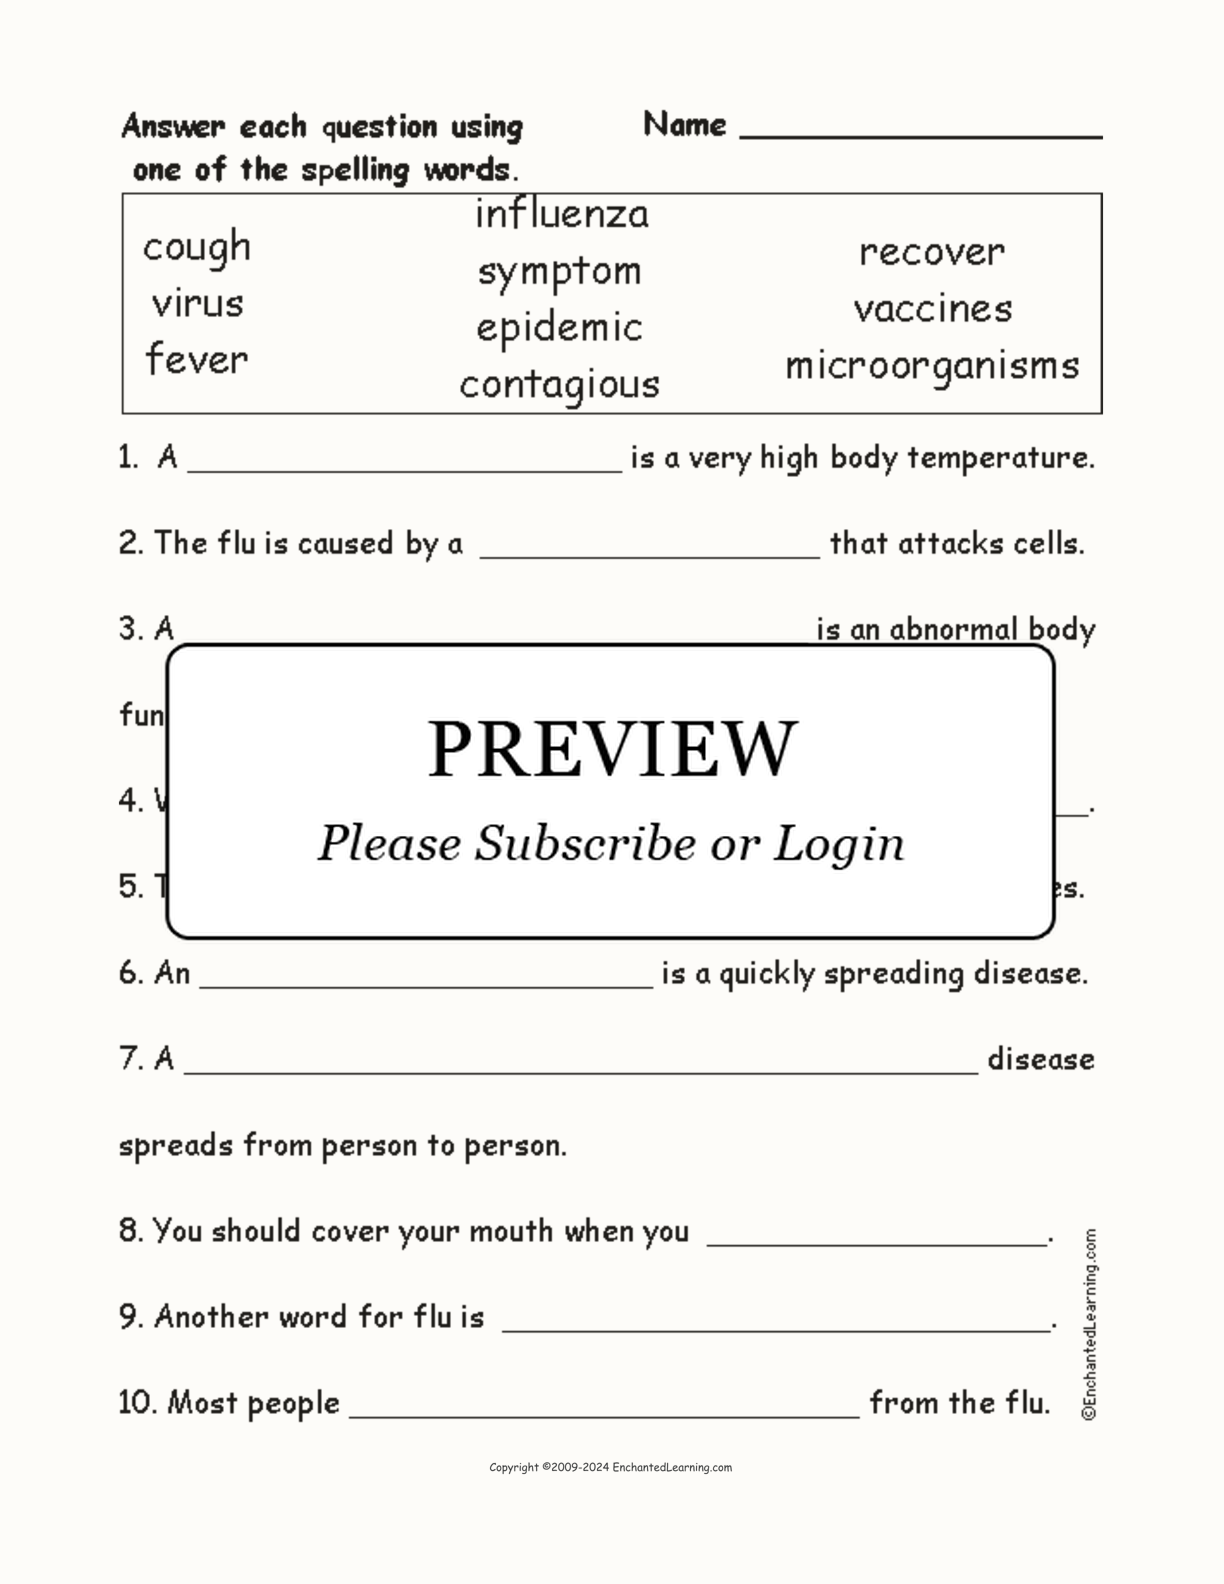 Flu Spelling Word Questions interactive worksheet page 1